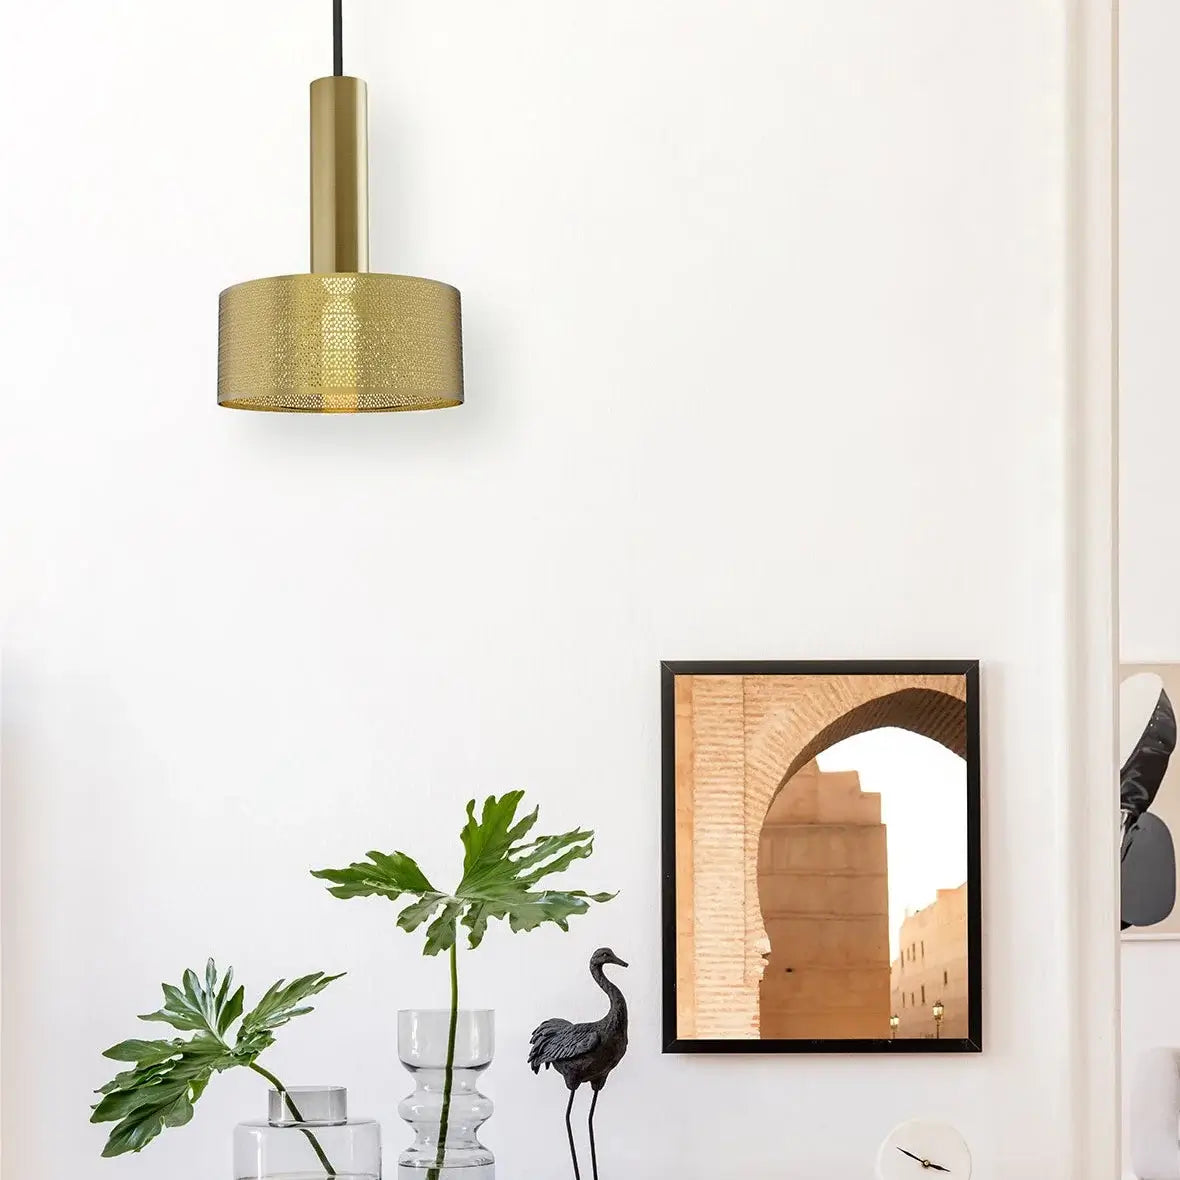 Dounia home Pendant light in polished brass  made of Gunmetal, Model: Alula